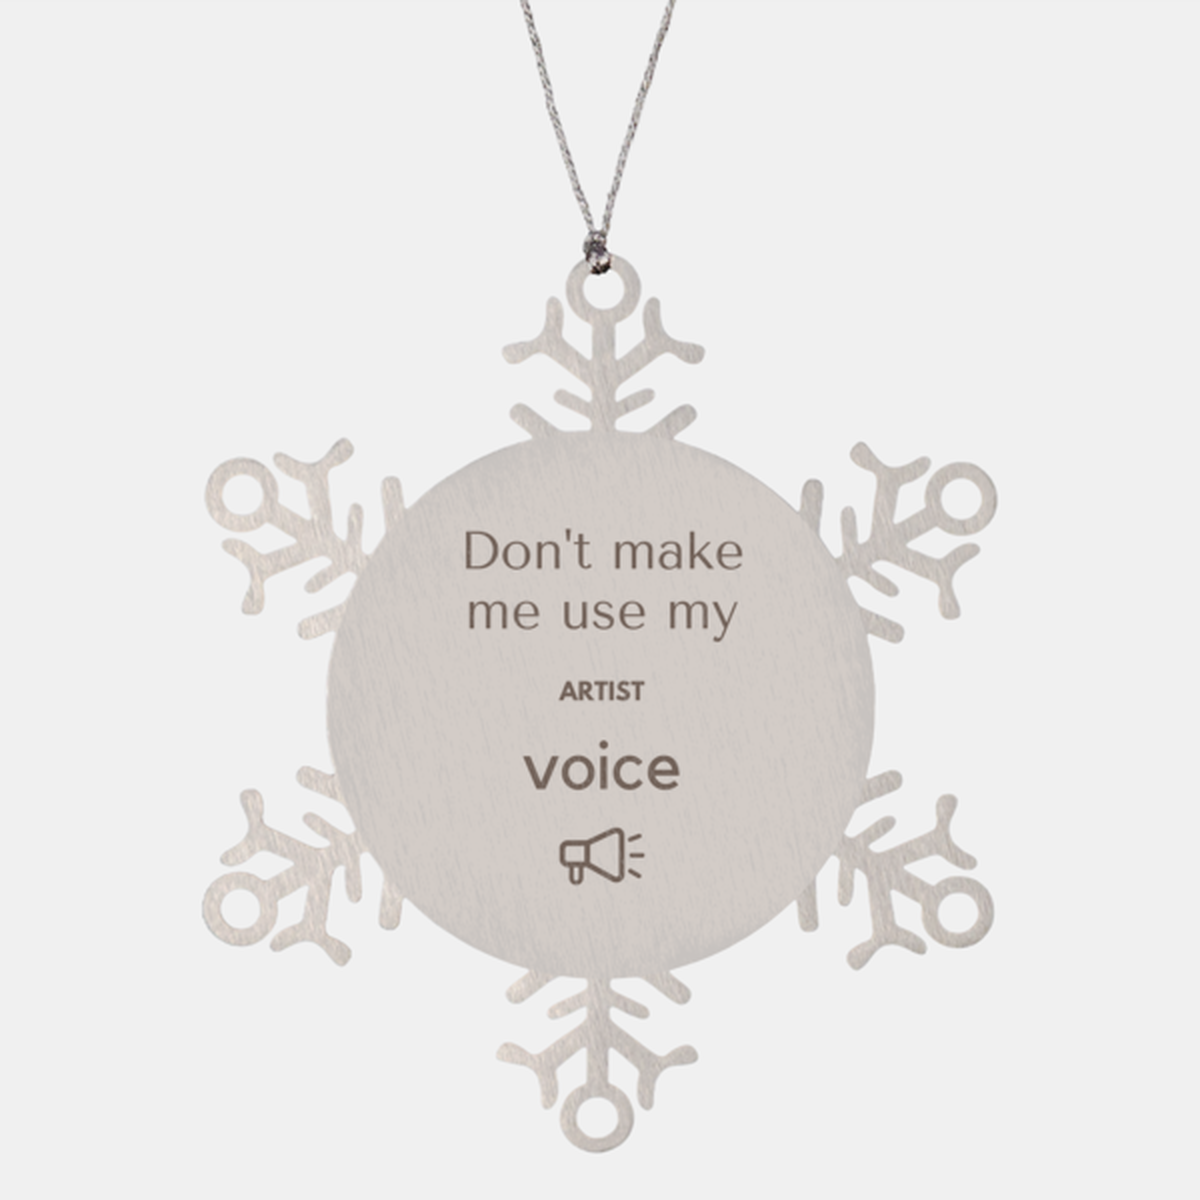 Don't make me use my Artist voice, Sarcasm Artist Ornament Gifts, Christmas Artist Snowflake Ornament Unique Gifts For Artist Coworkers, Men, Women, Colleague, Friends